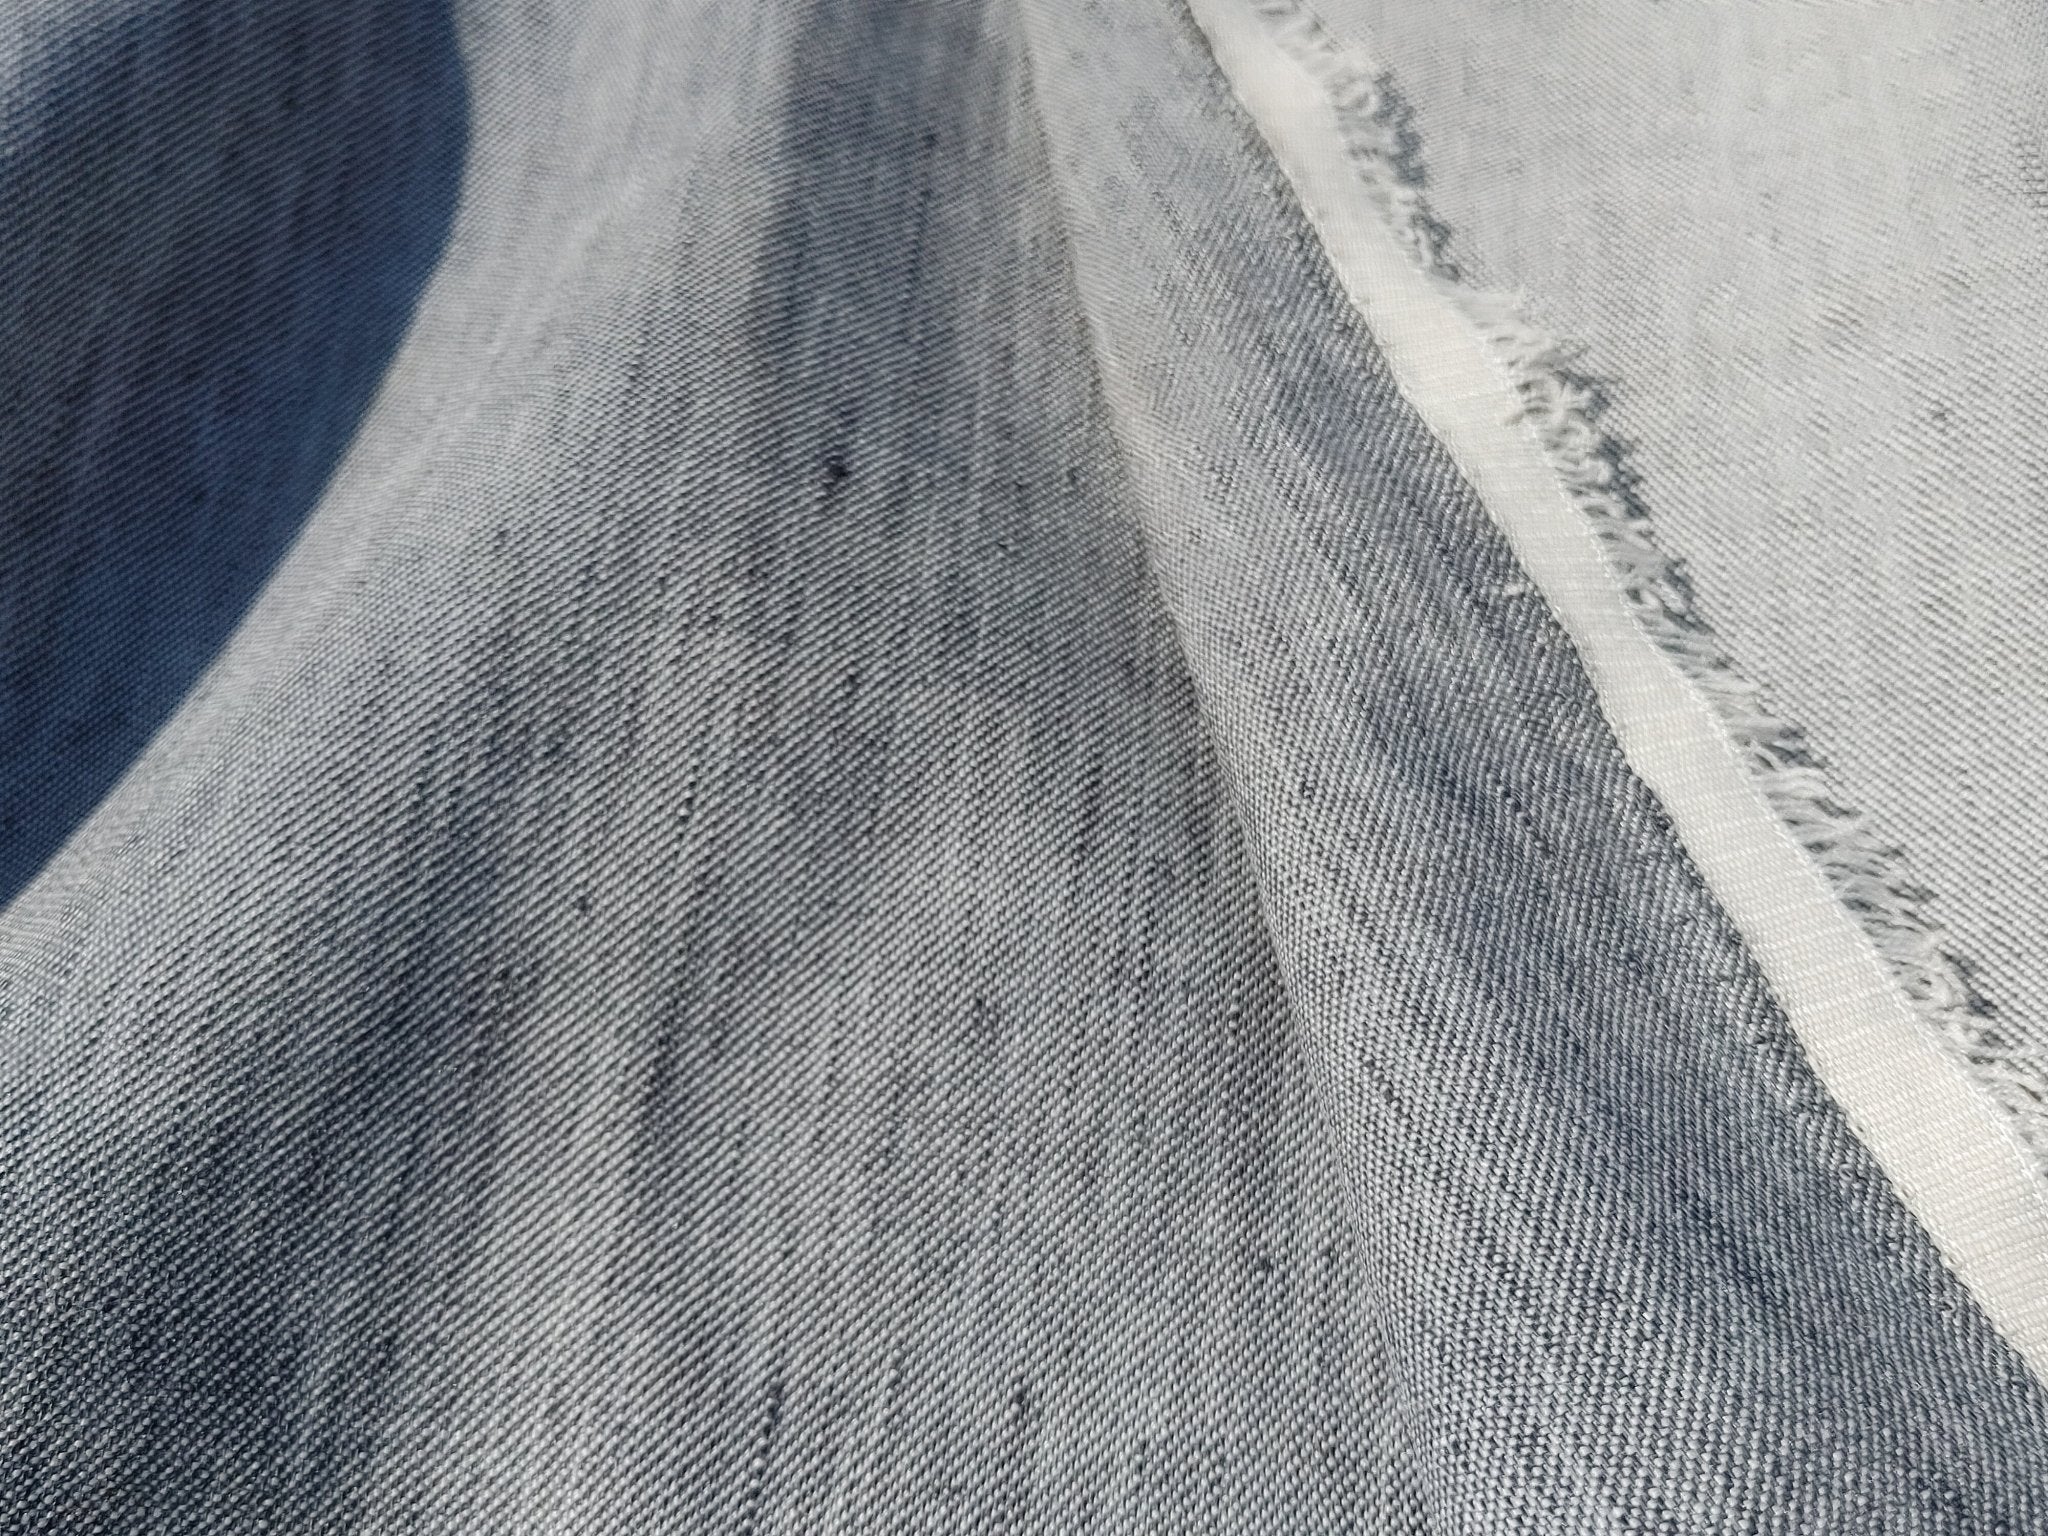 Linen Cotton Rayon Twill Fabric: Denim-Inspired Style 7321 - The Linen Lab - Navy